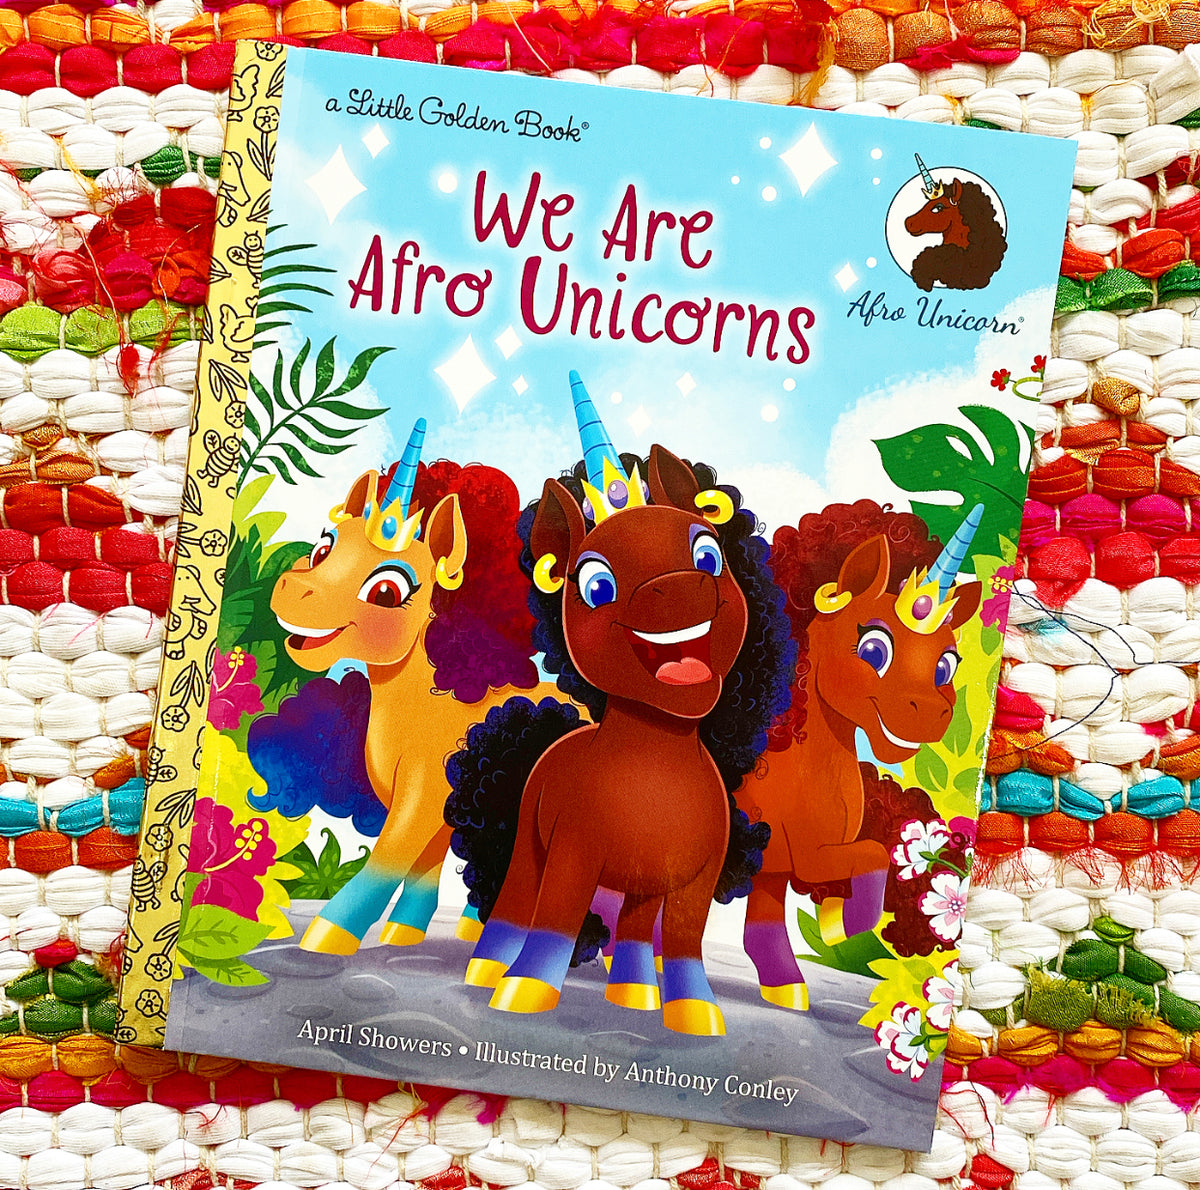 We Are Afro Unicorns (Little Golden Book)